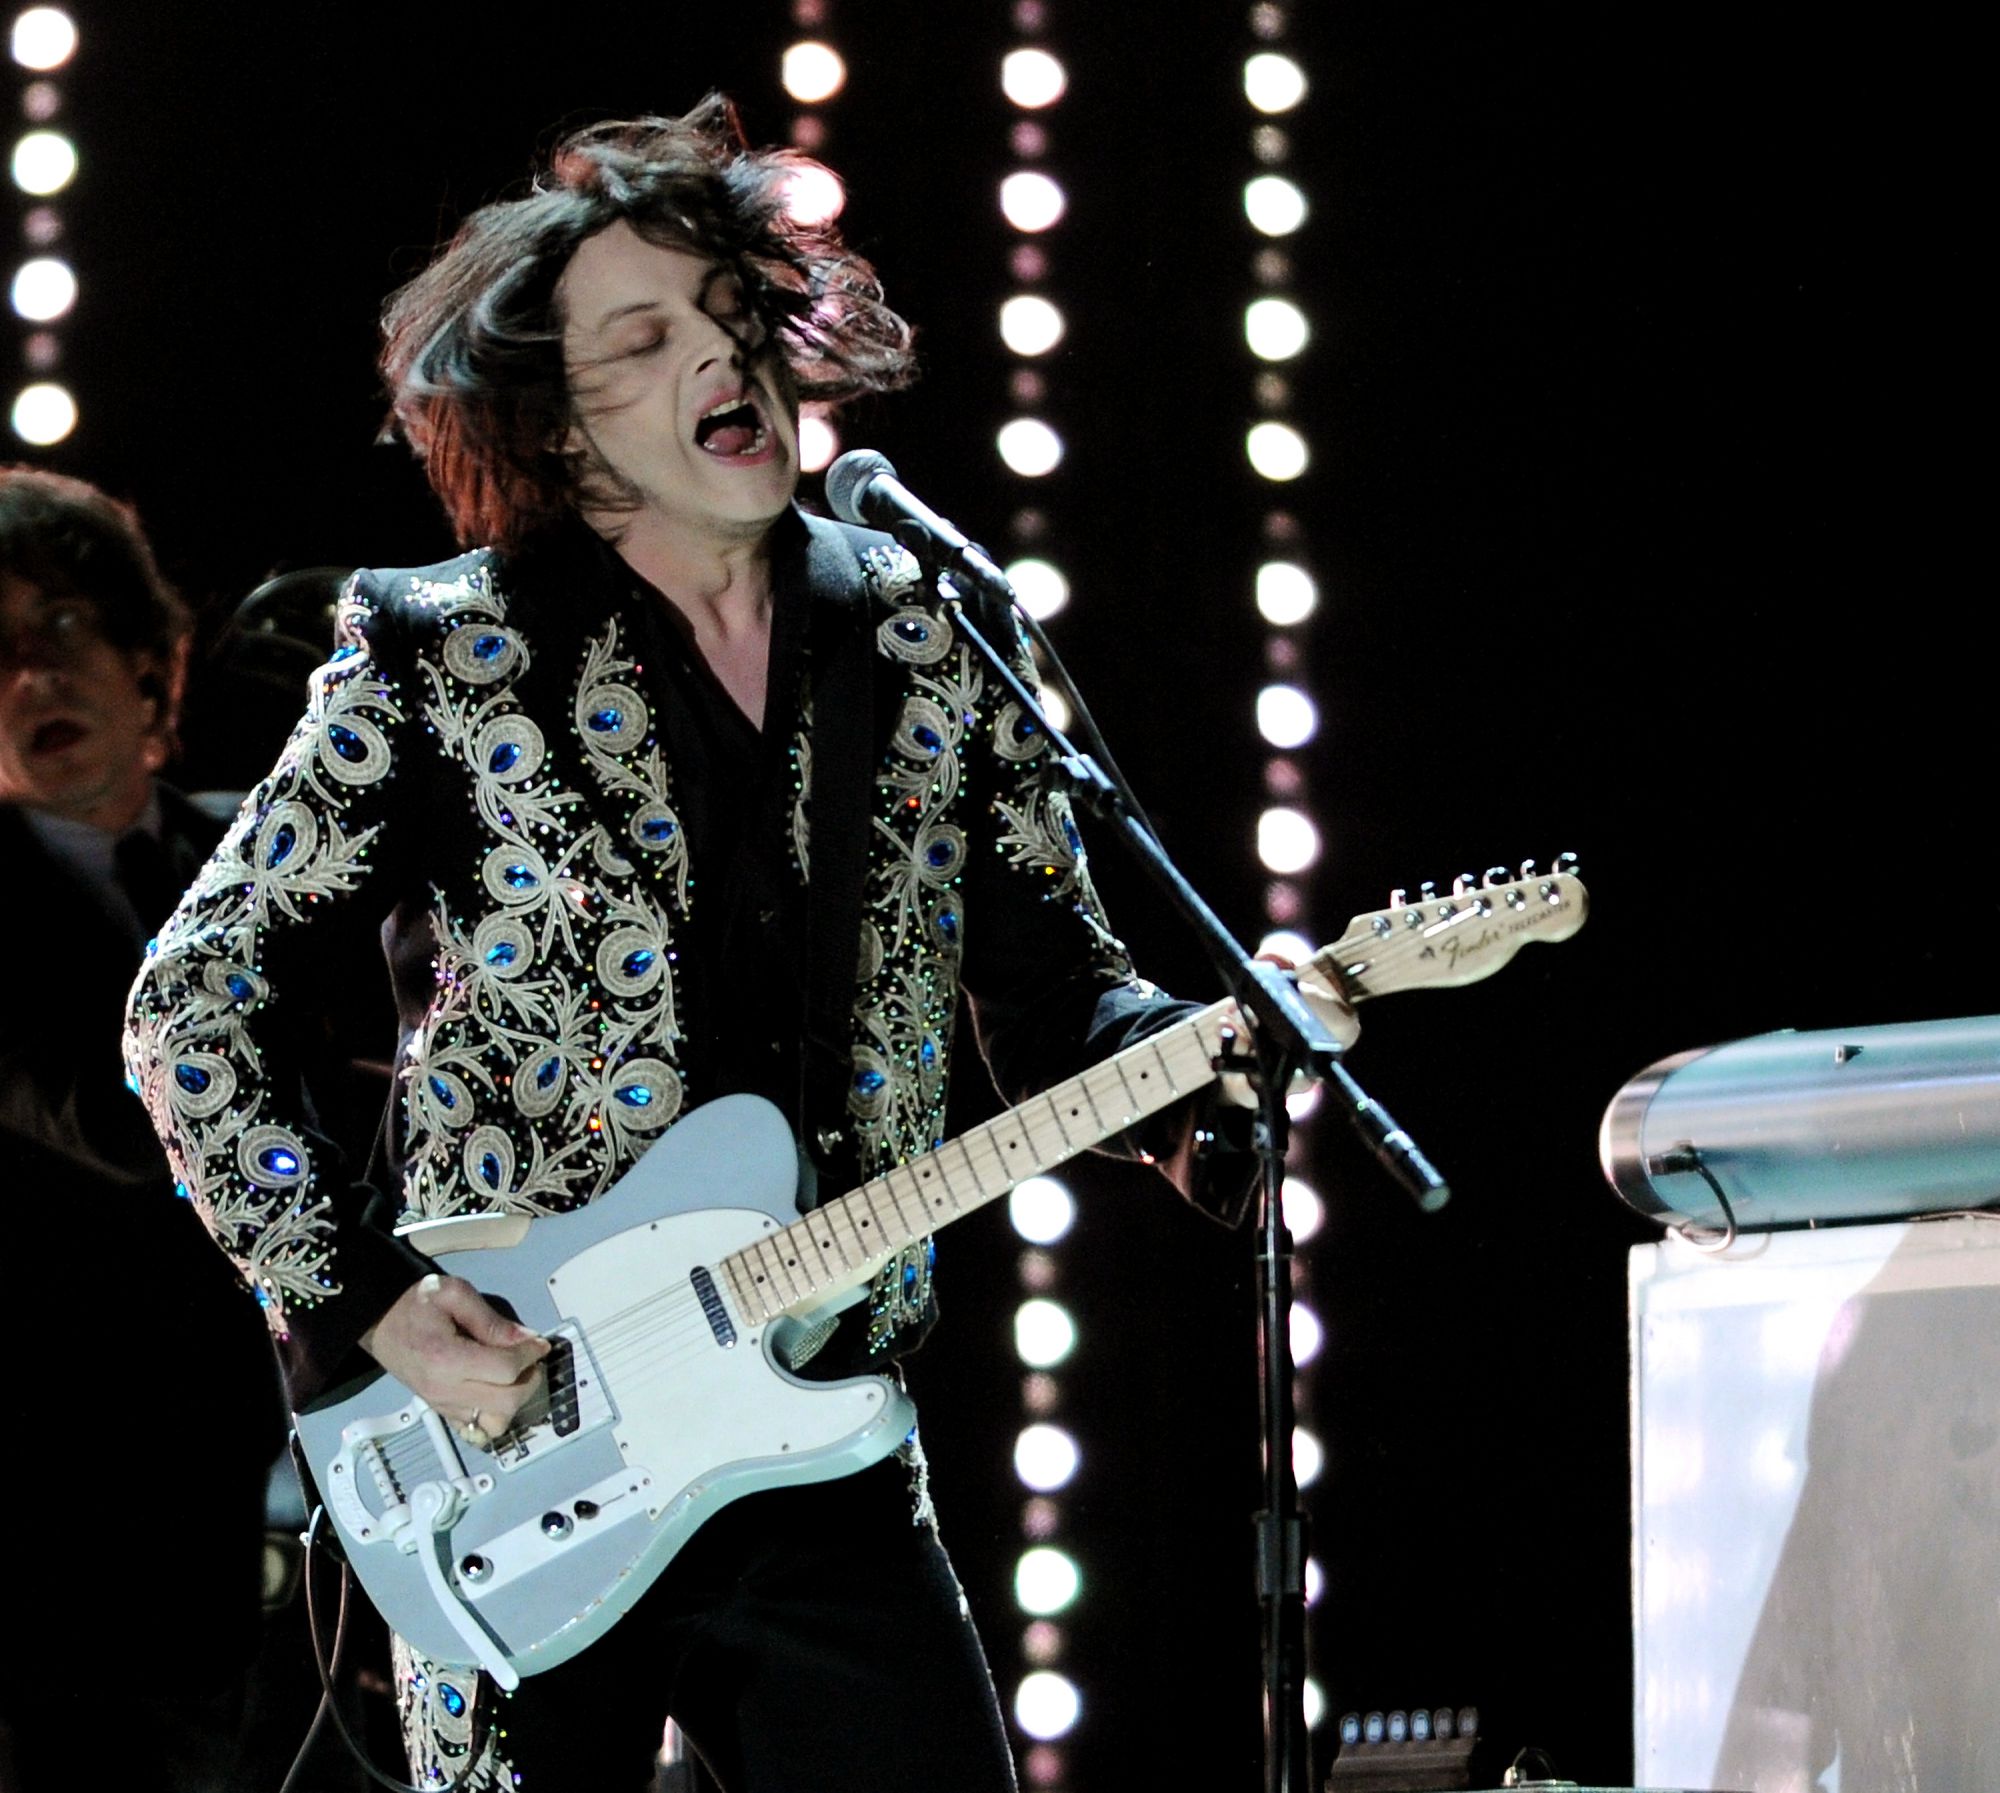 Jack White au 55th Annual Grammy Awards at the Staples Center, in Los Angeles. Février 2013